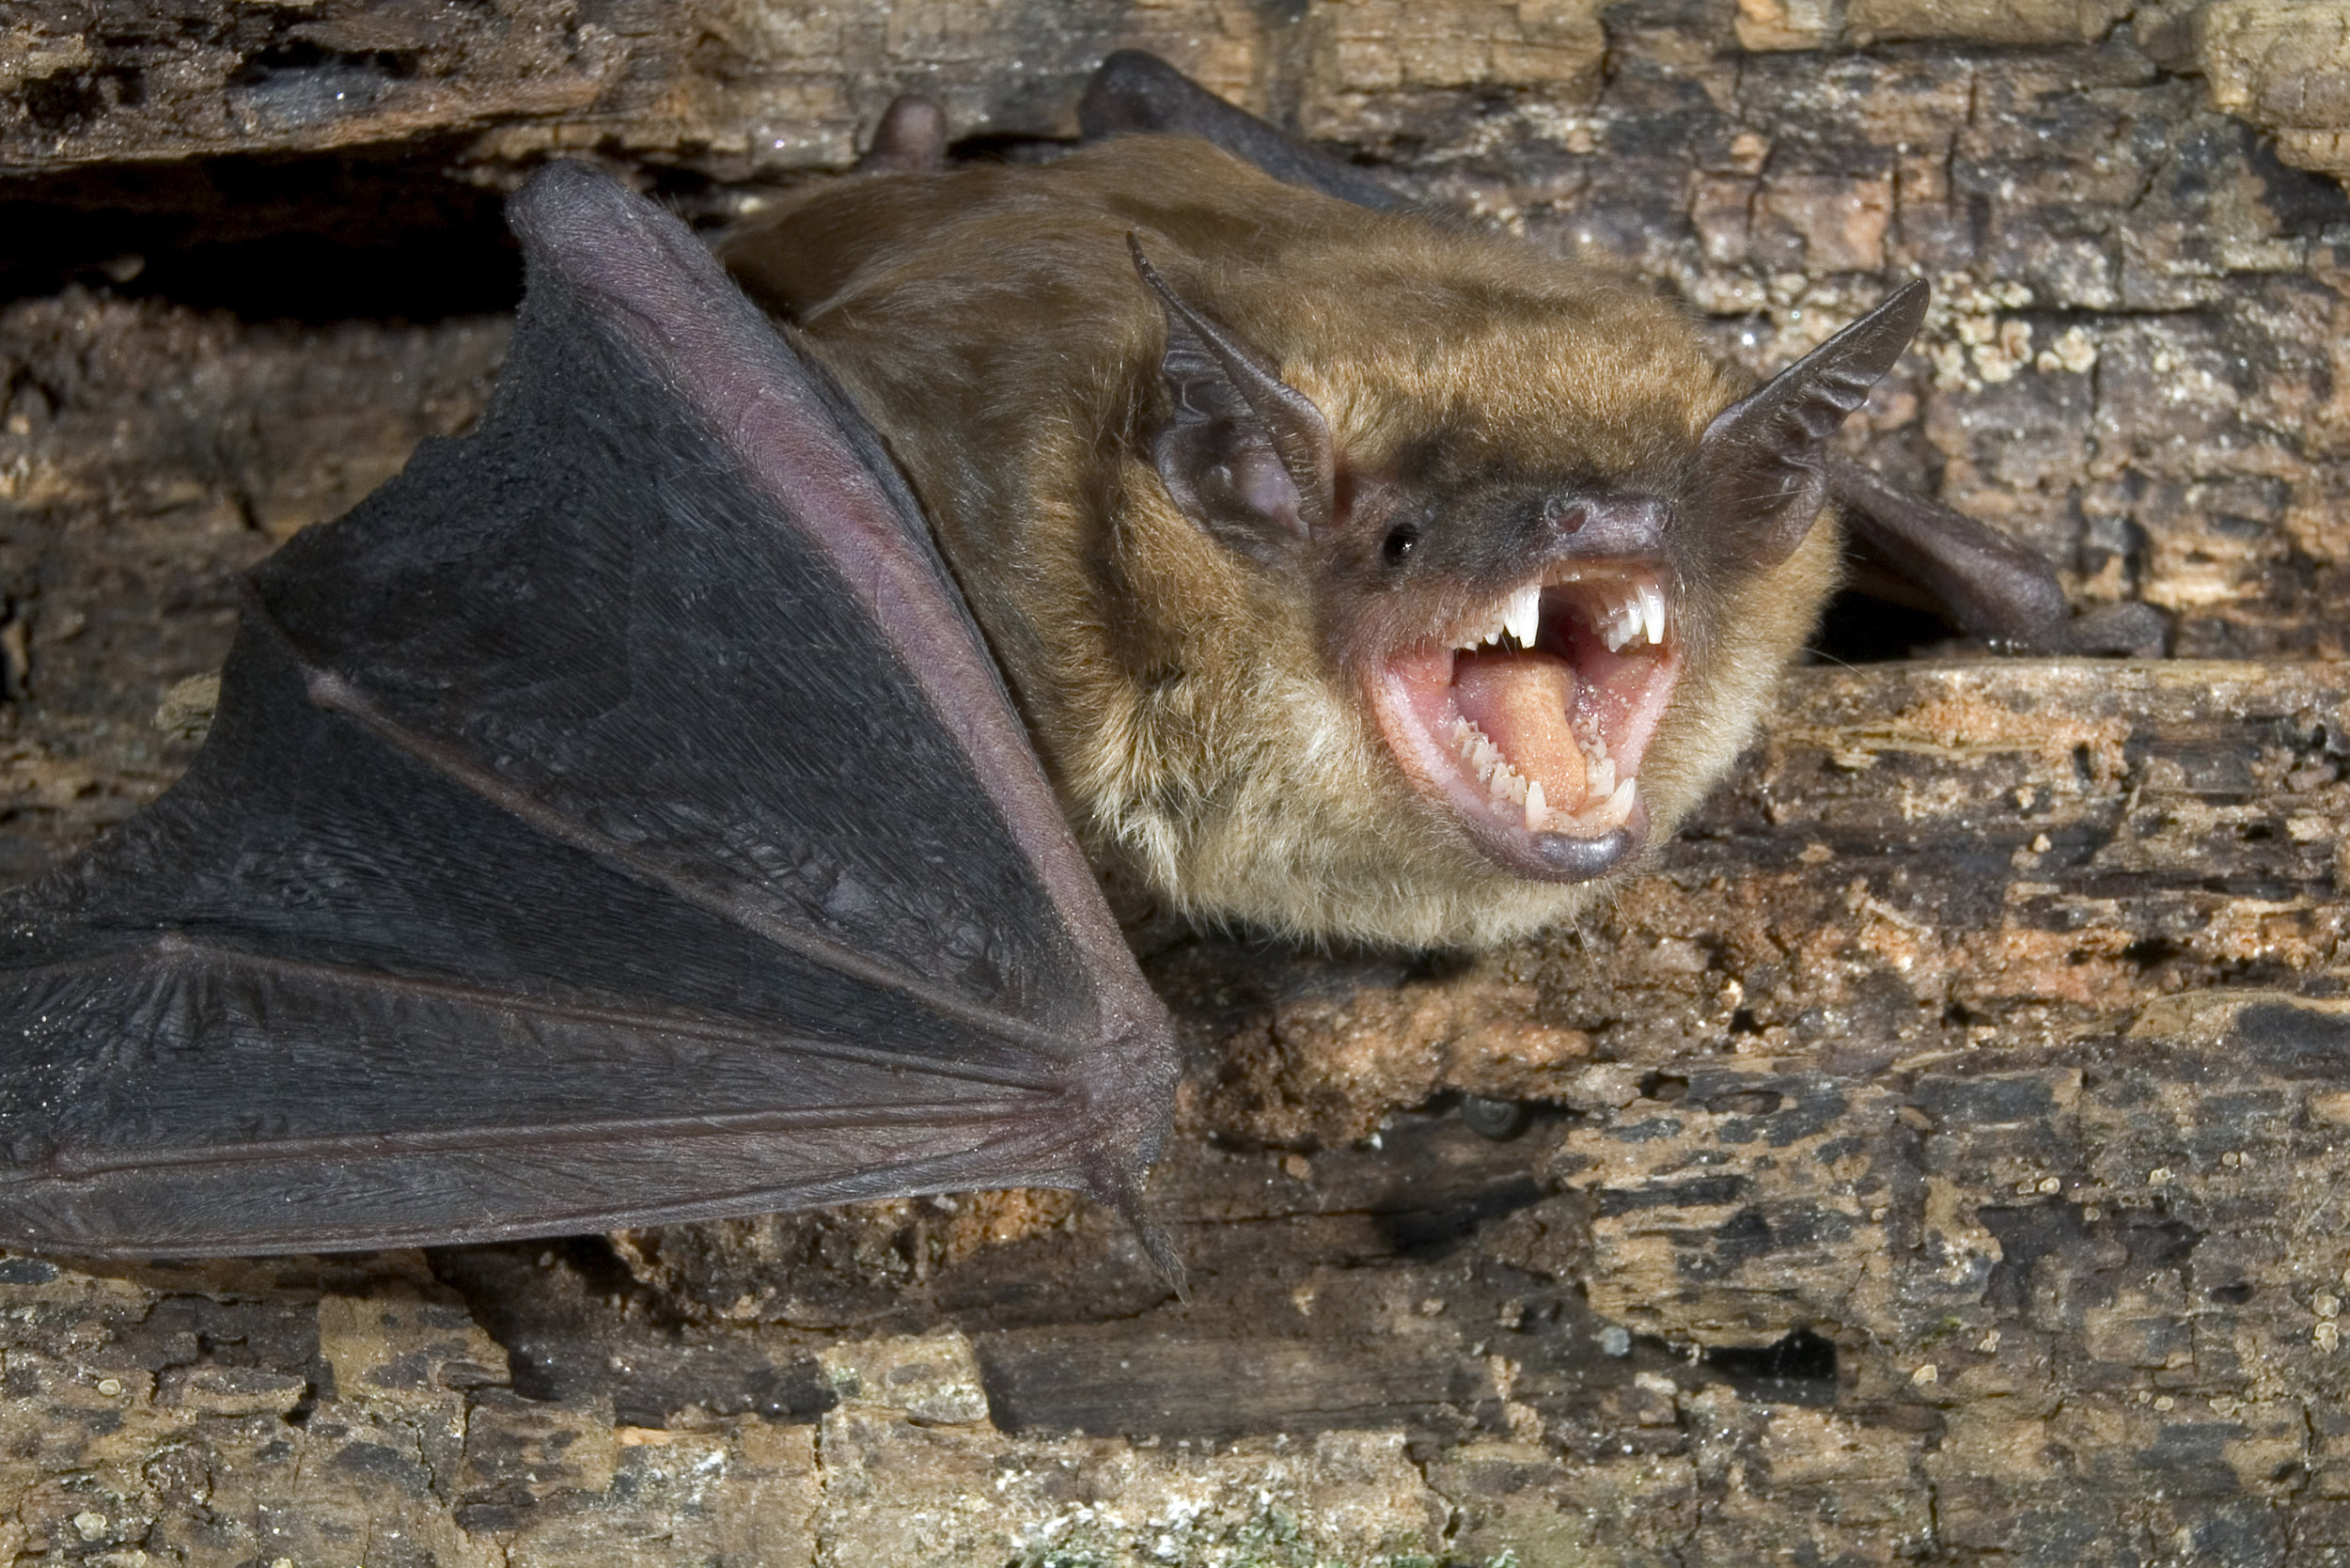 Bats in the mines